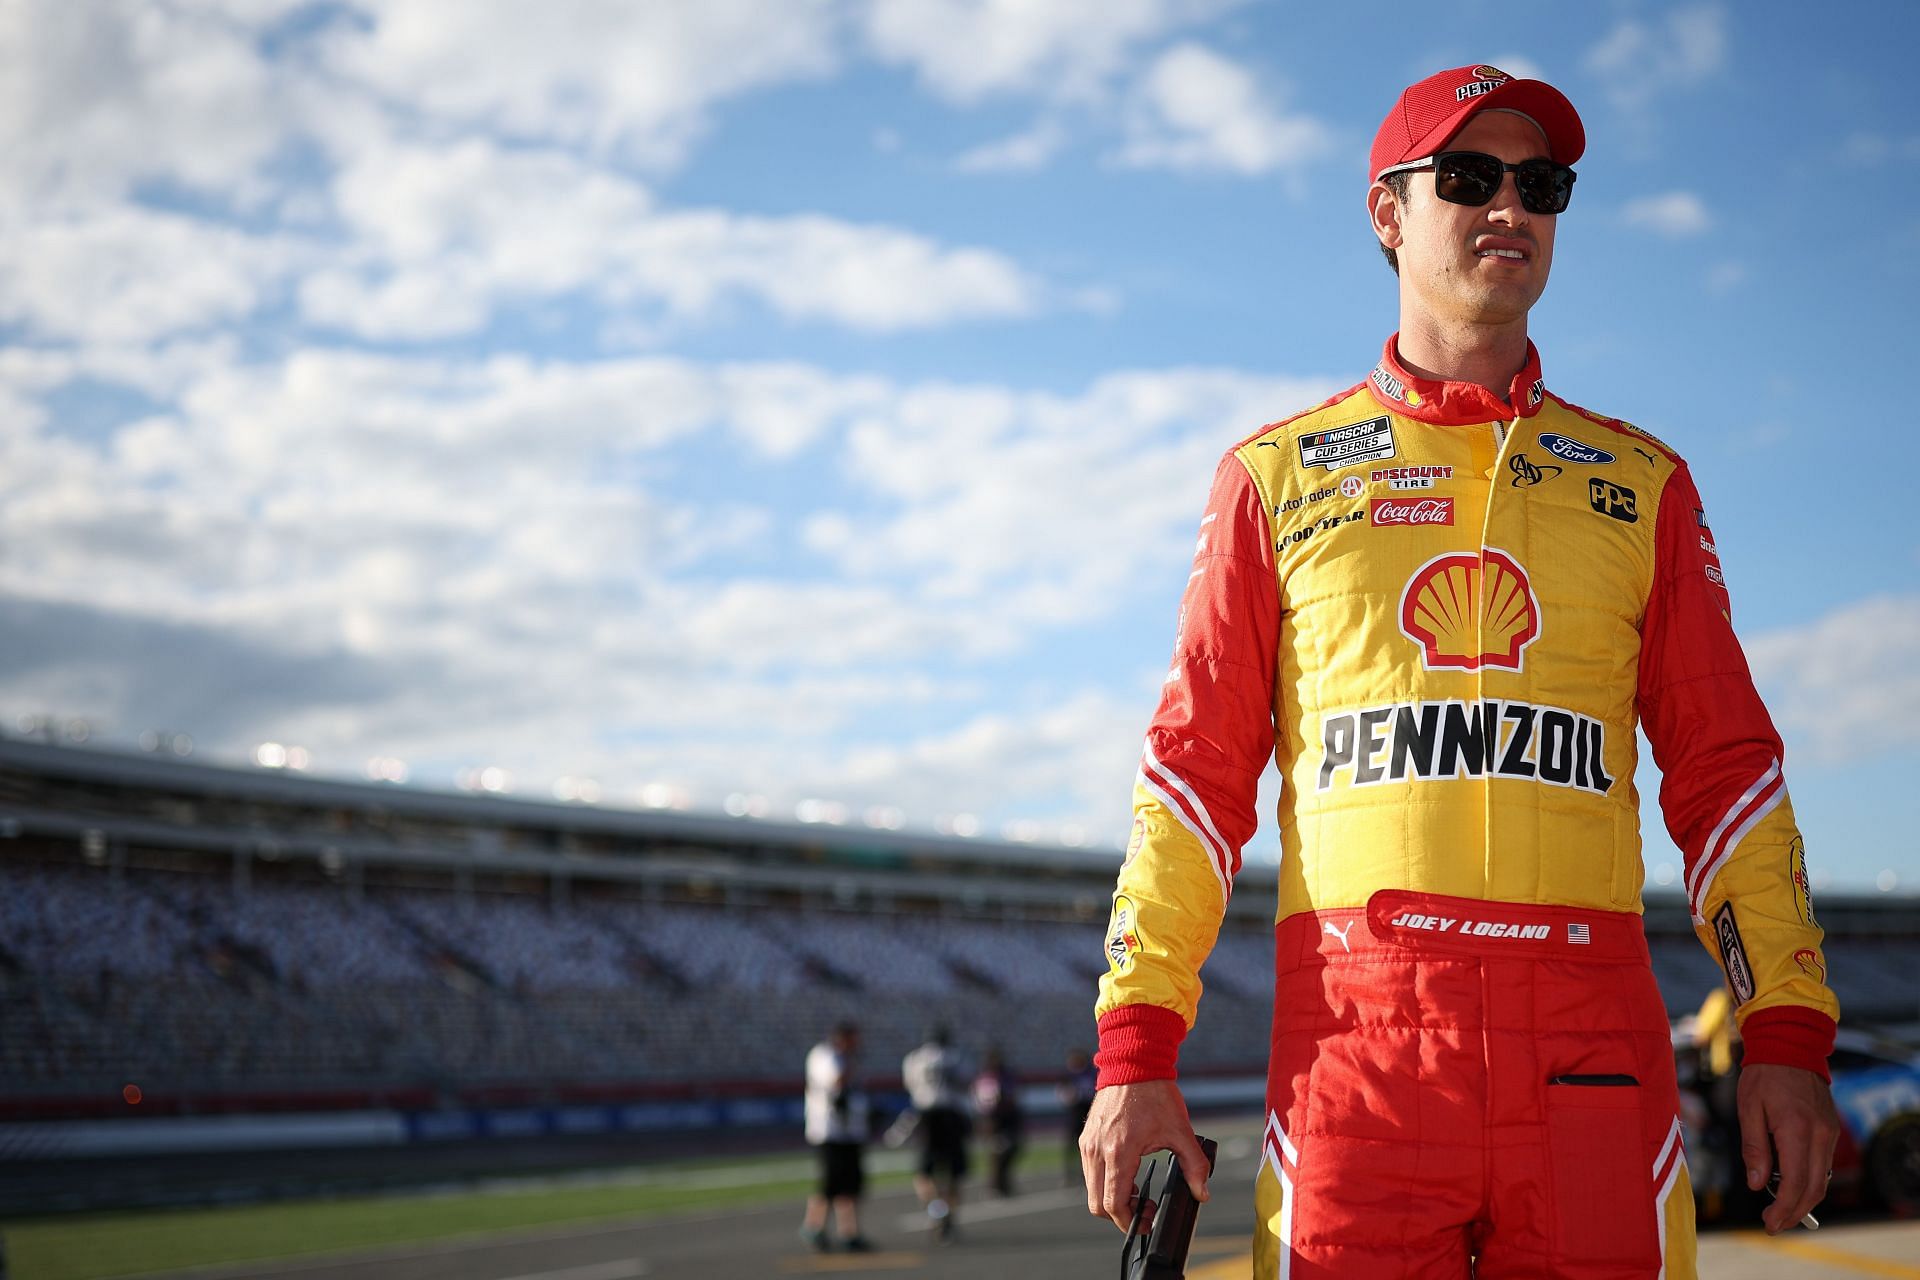 Joey Logano walks the grid during practice for the 2022 NASCAR Cup Series Coca-Cola 600 at Charlotte Motor Speedway in Concord, North Carolina. (Photo by James Gilbert/Getty Images)